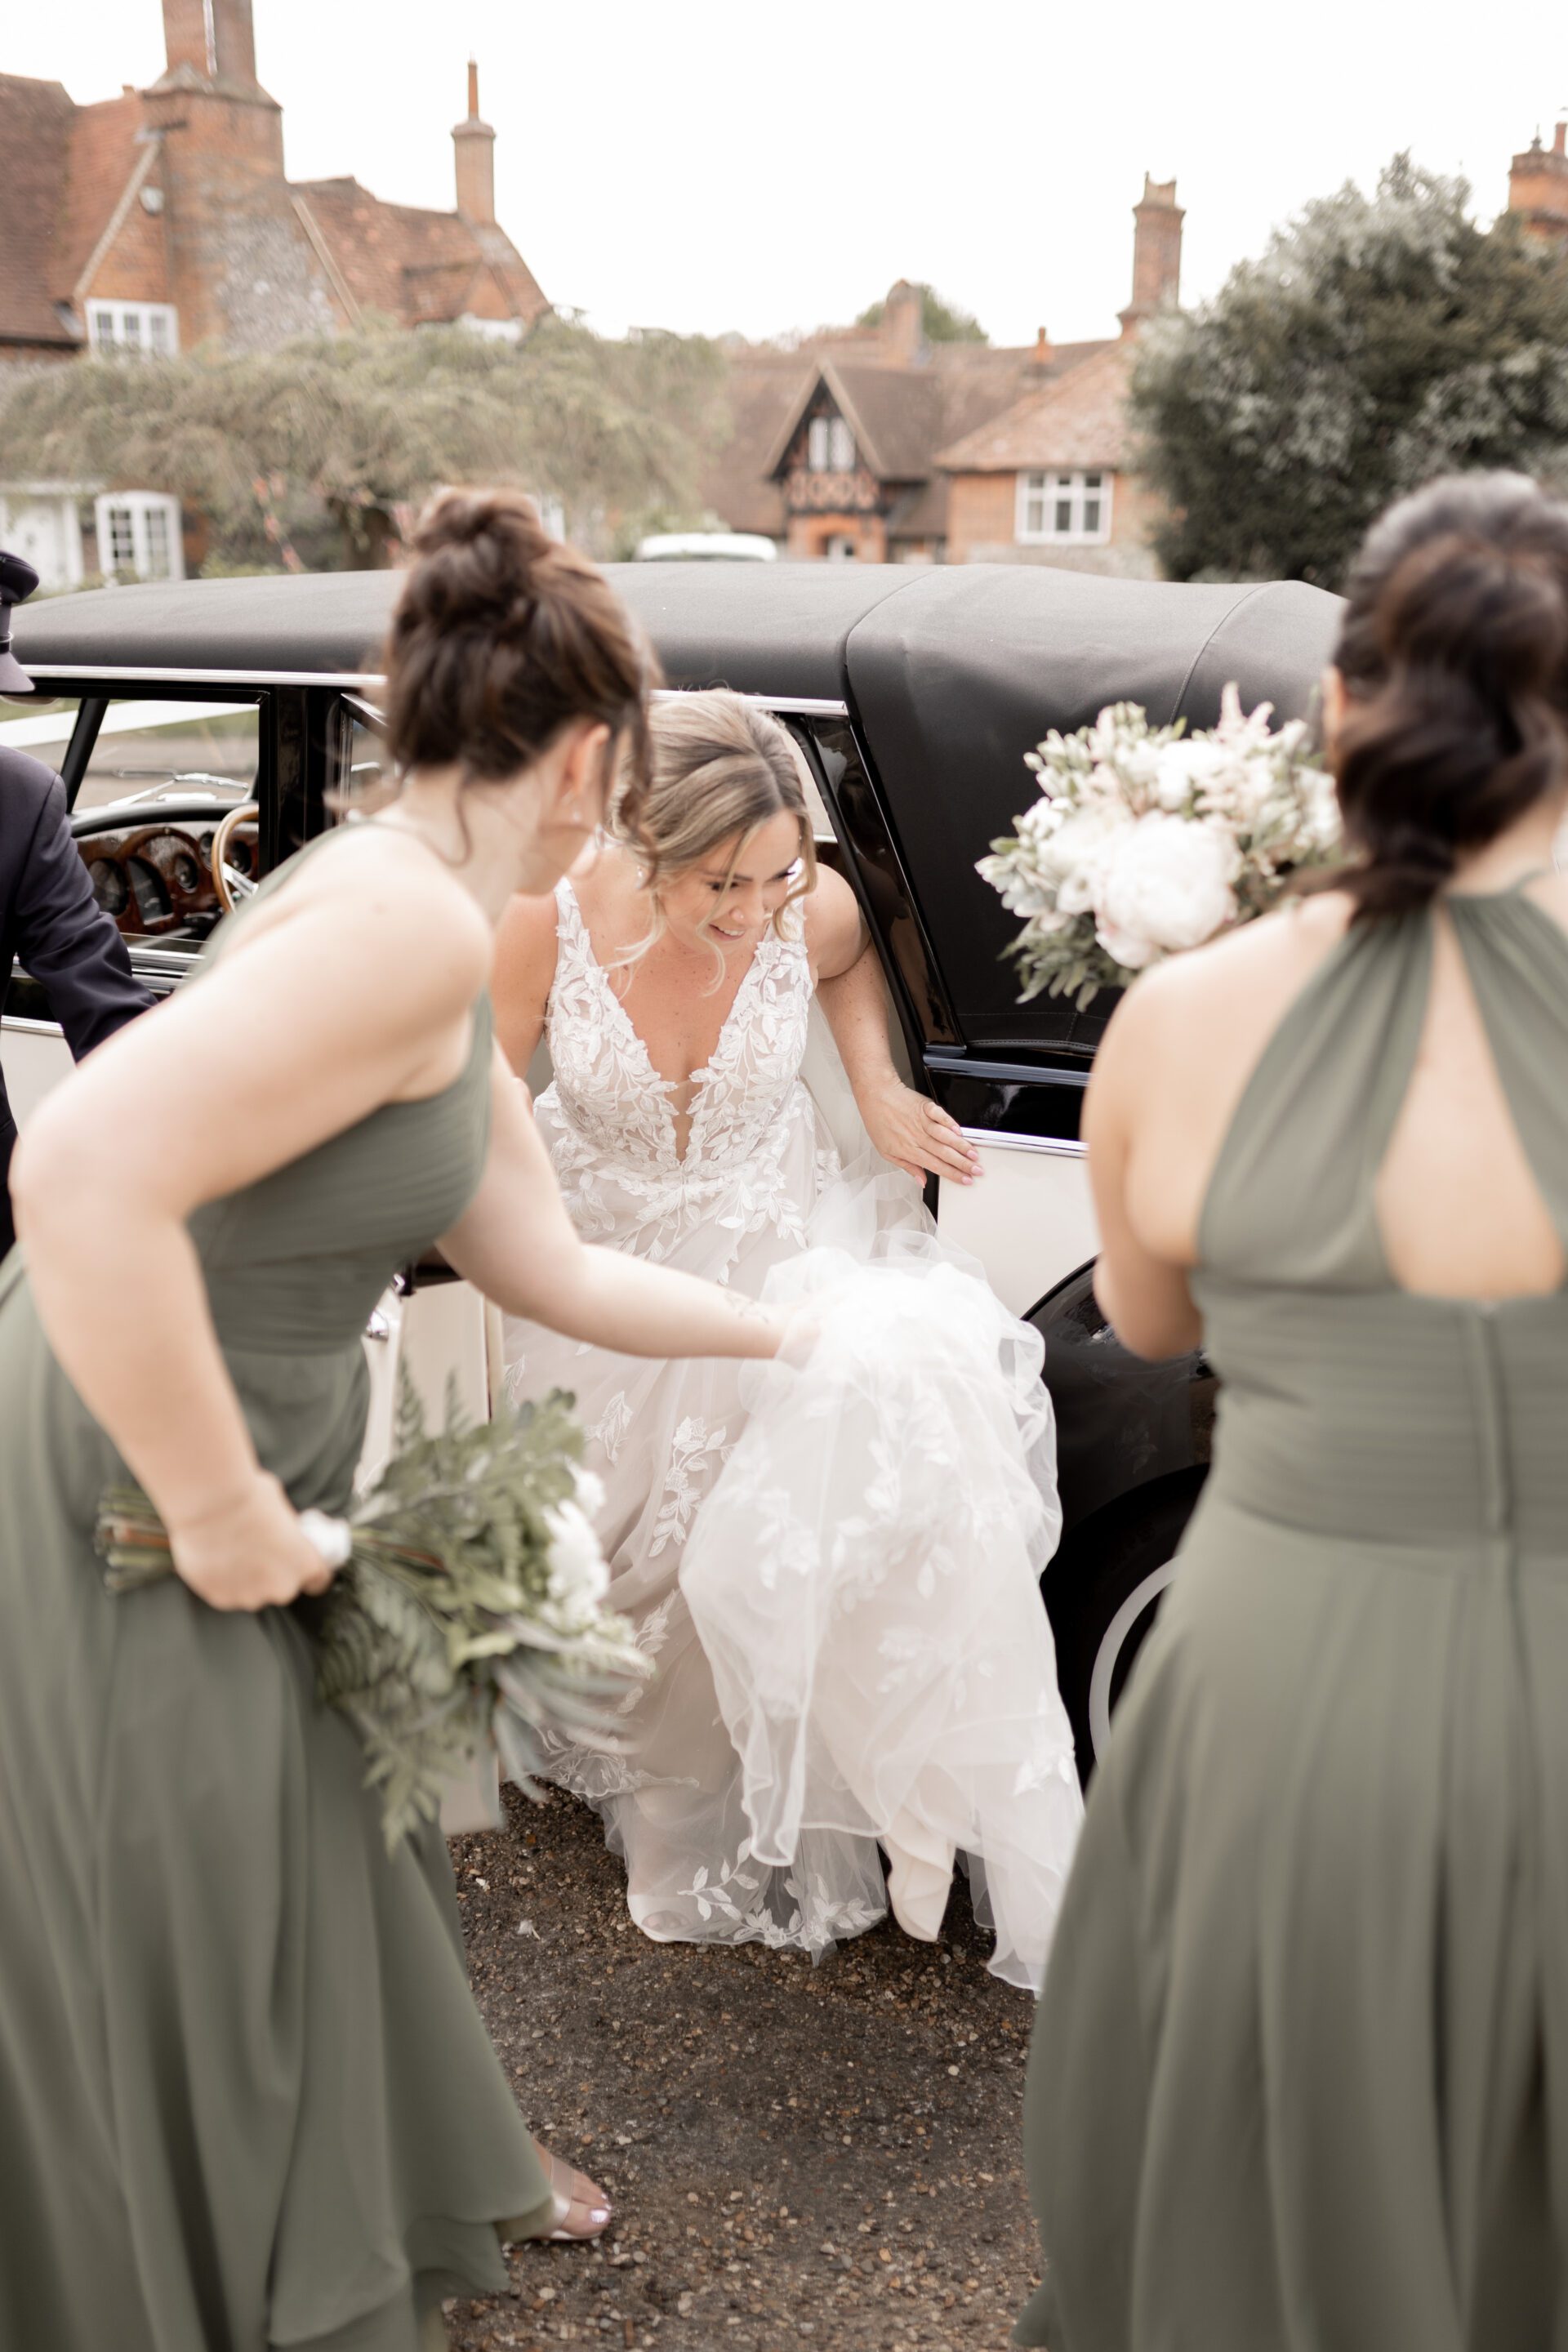 The bride gets out of the vintage wedding car before her wedding ceremony in Oxfordshire